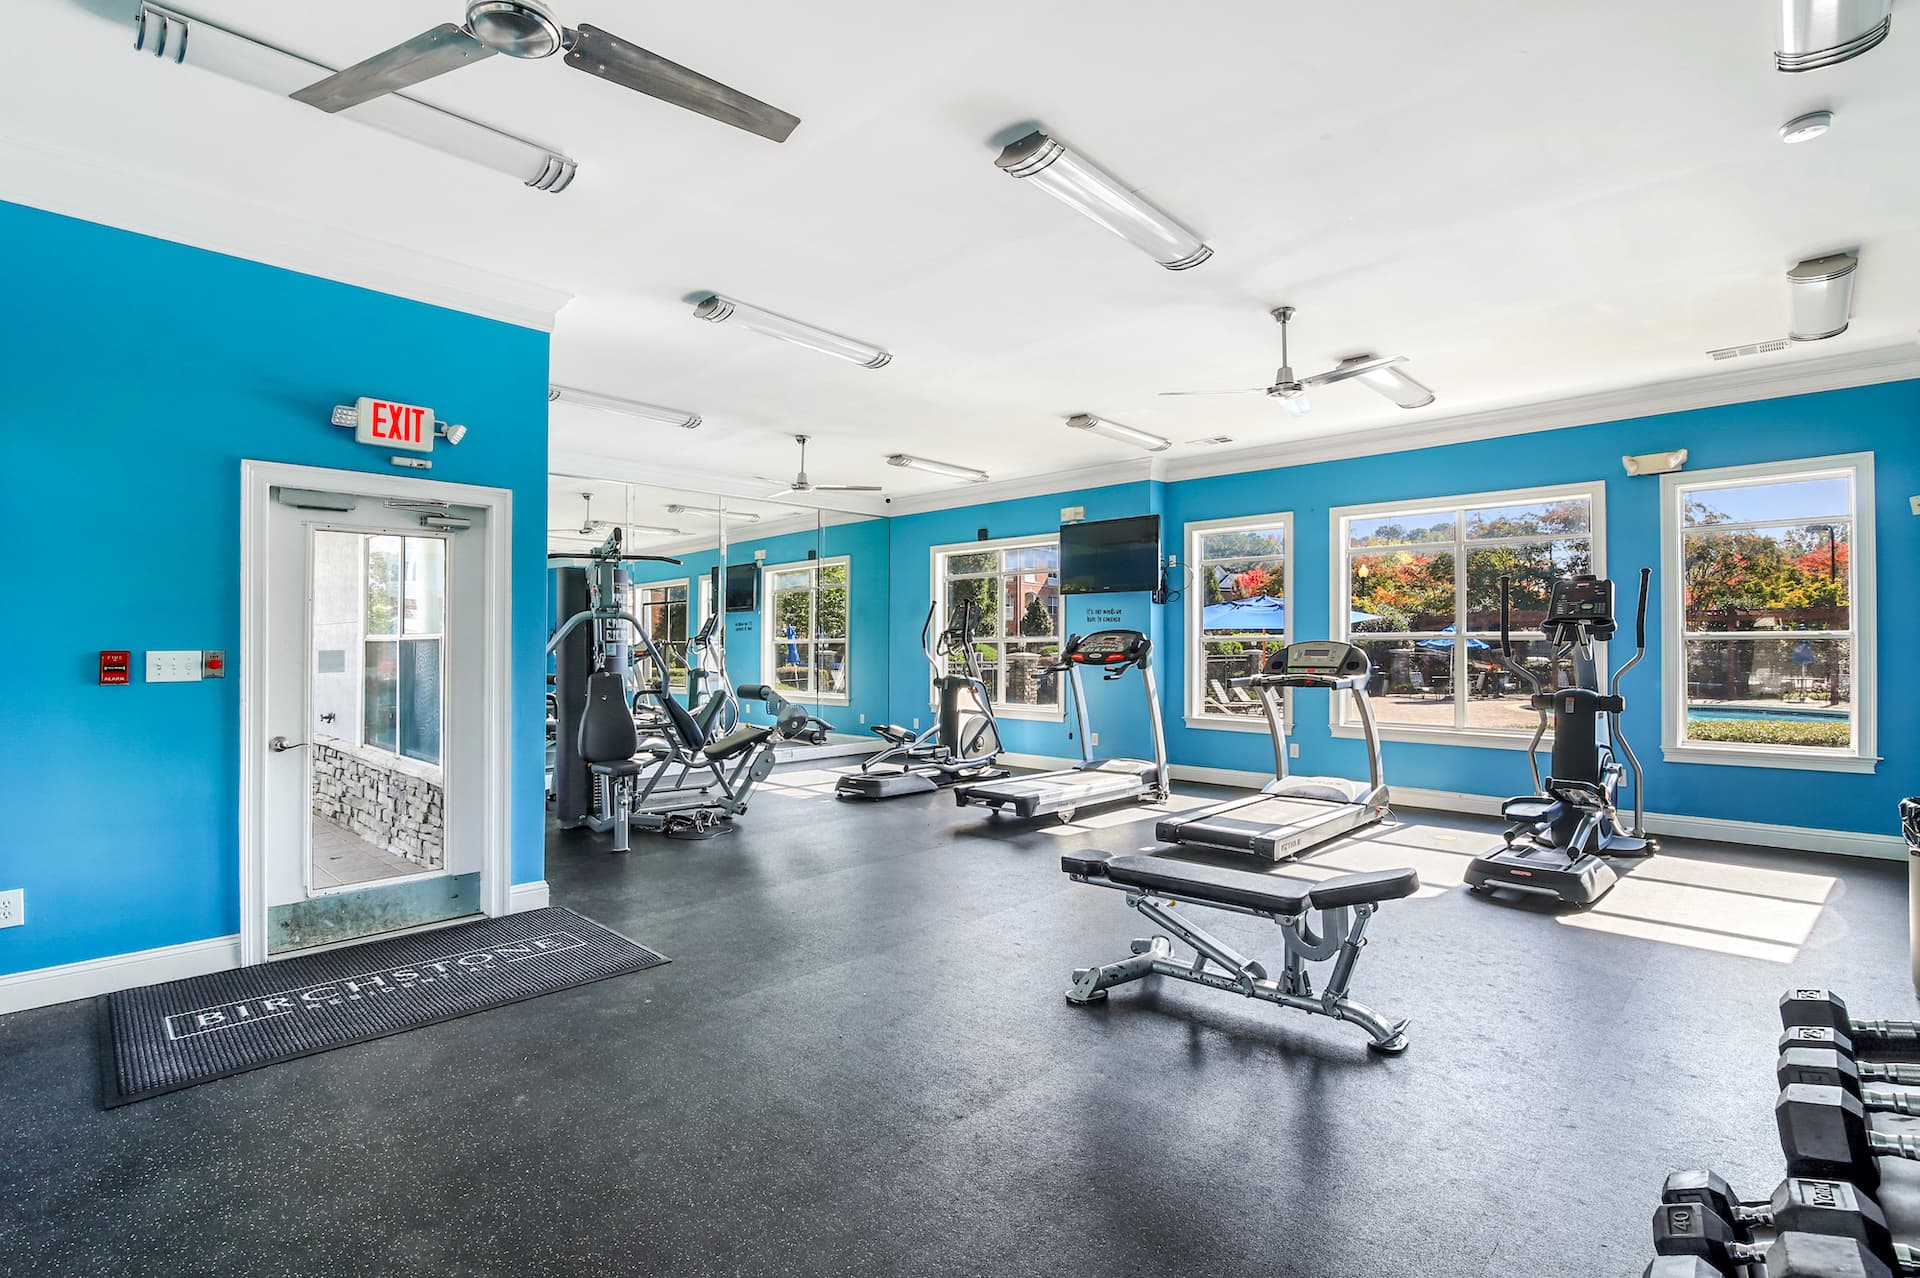 Complex fitness center with weight lifting equipment